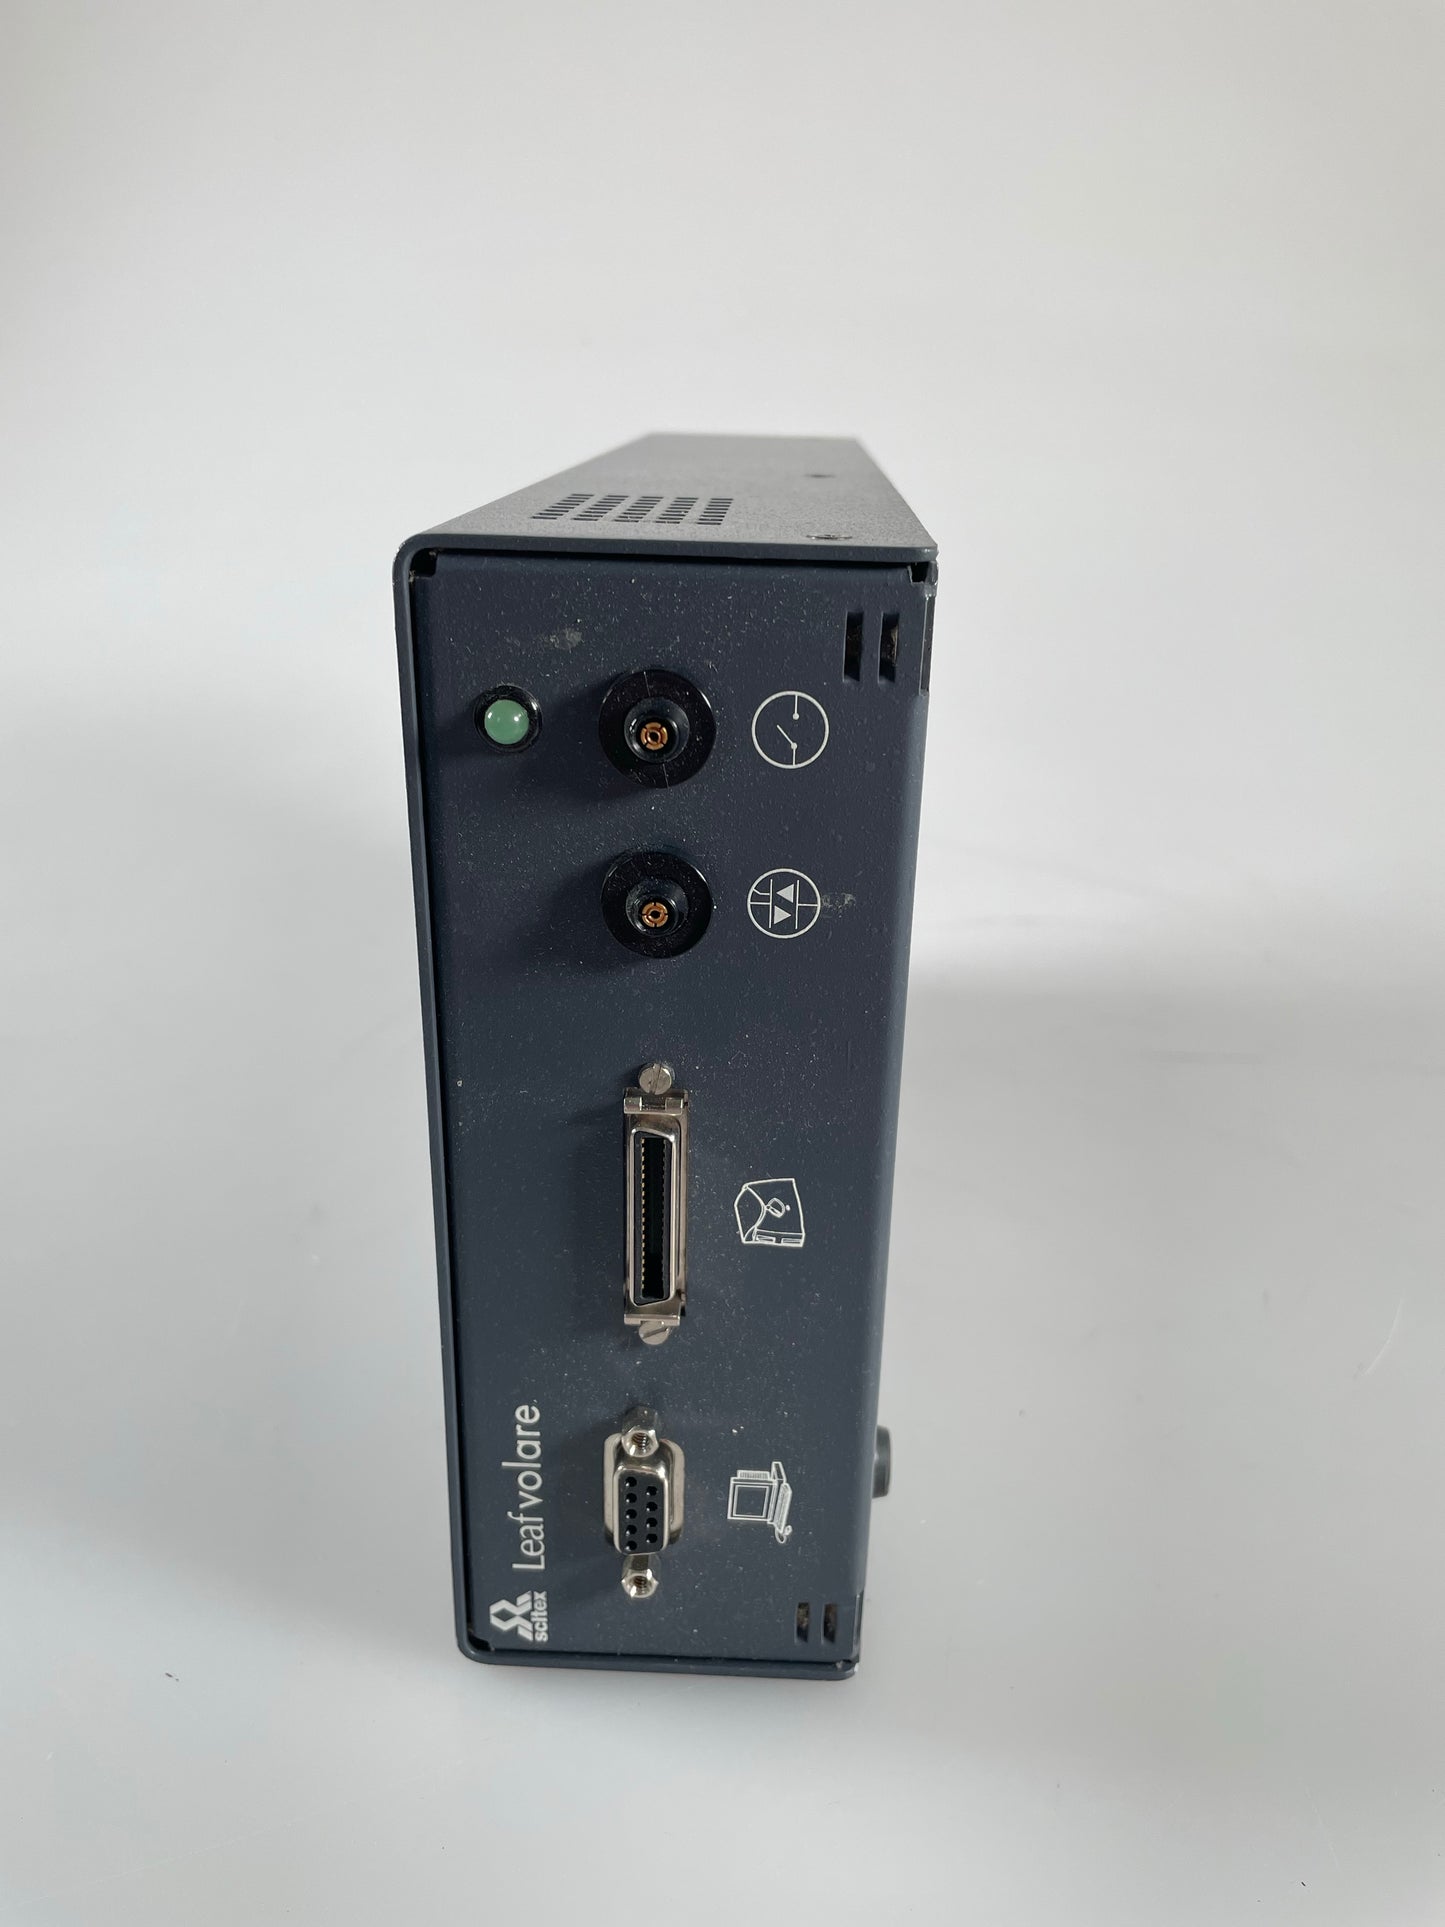 Leaf DCB II Digital Back for Sinar with power supply (Untested)